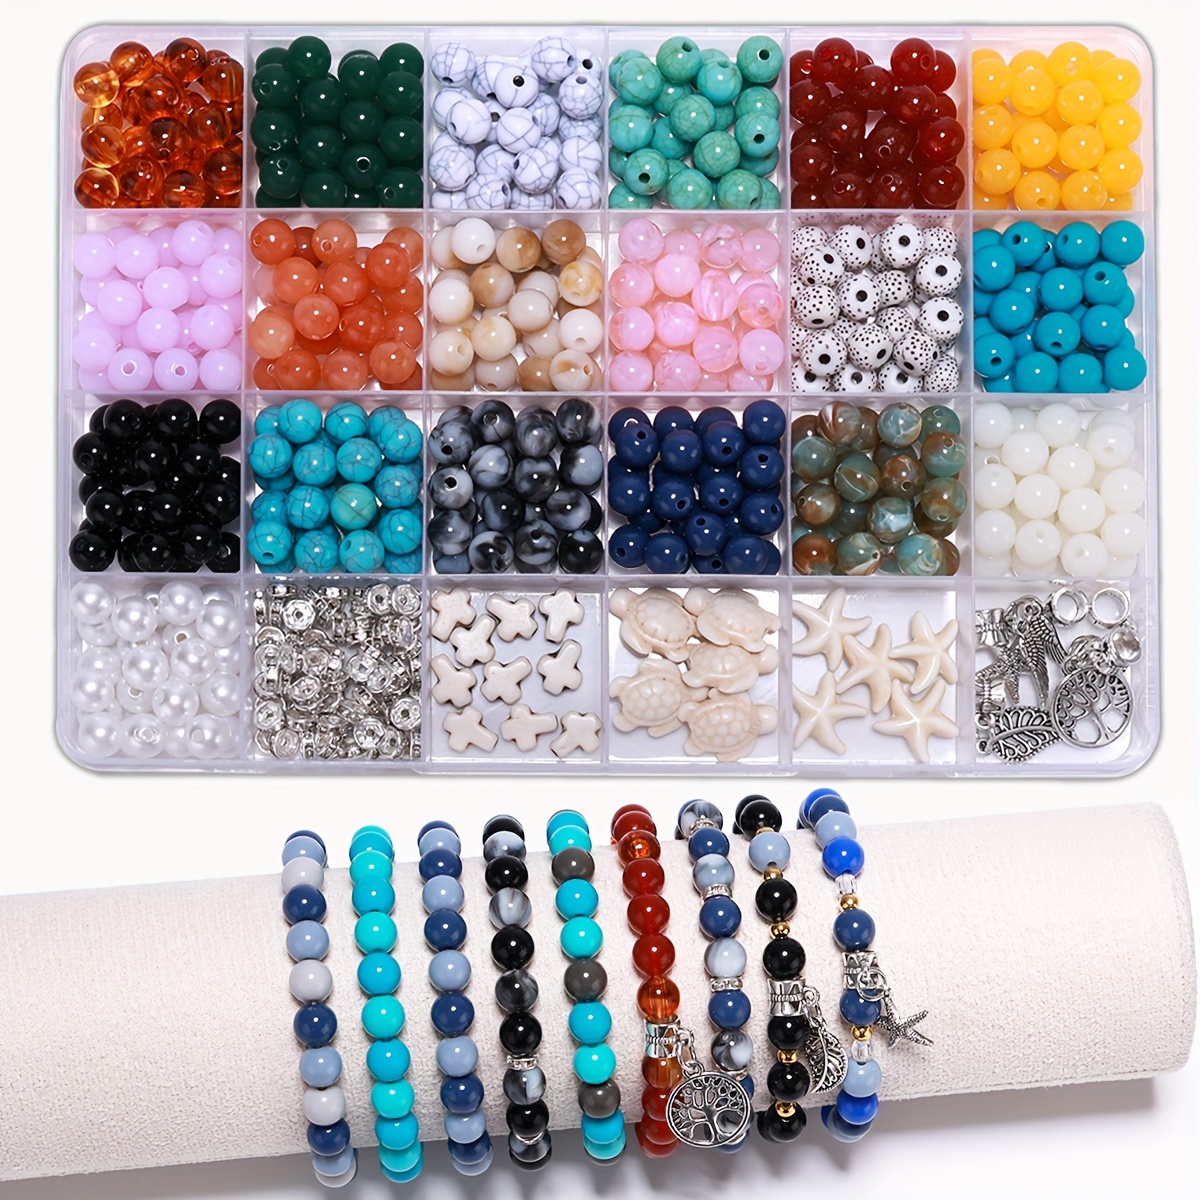 Mchruie Christmas Bracelet Making Kit, Crystal Beads for Bracelets Making -  375pc Glass Beads for Jewelry Making Adults 8mm Round Gemstone Beads DIY